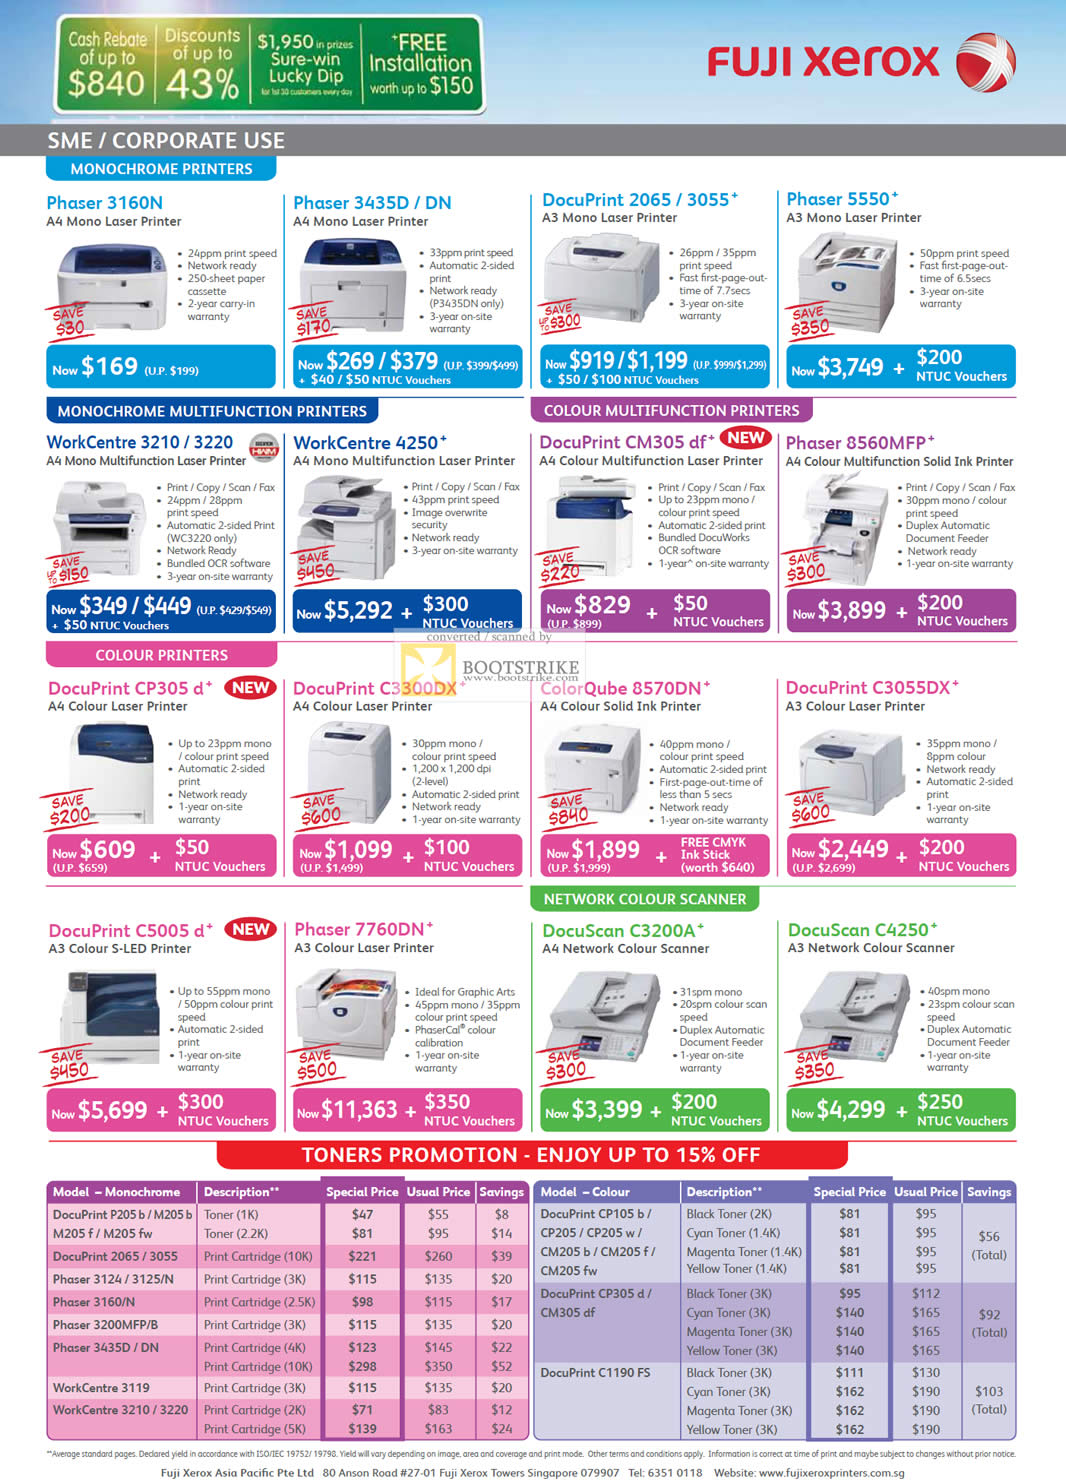 COMEX 2011 price list image brochure of Fuji Xerox Printers Laser Phaser 3160N DN DocuPrint 2065 3055 5550 WorkCentre 3210 4250 CM305 Df 8560MFP CP305 ColorQube C3255DX 7760DN Scanners C3200A C4250